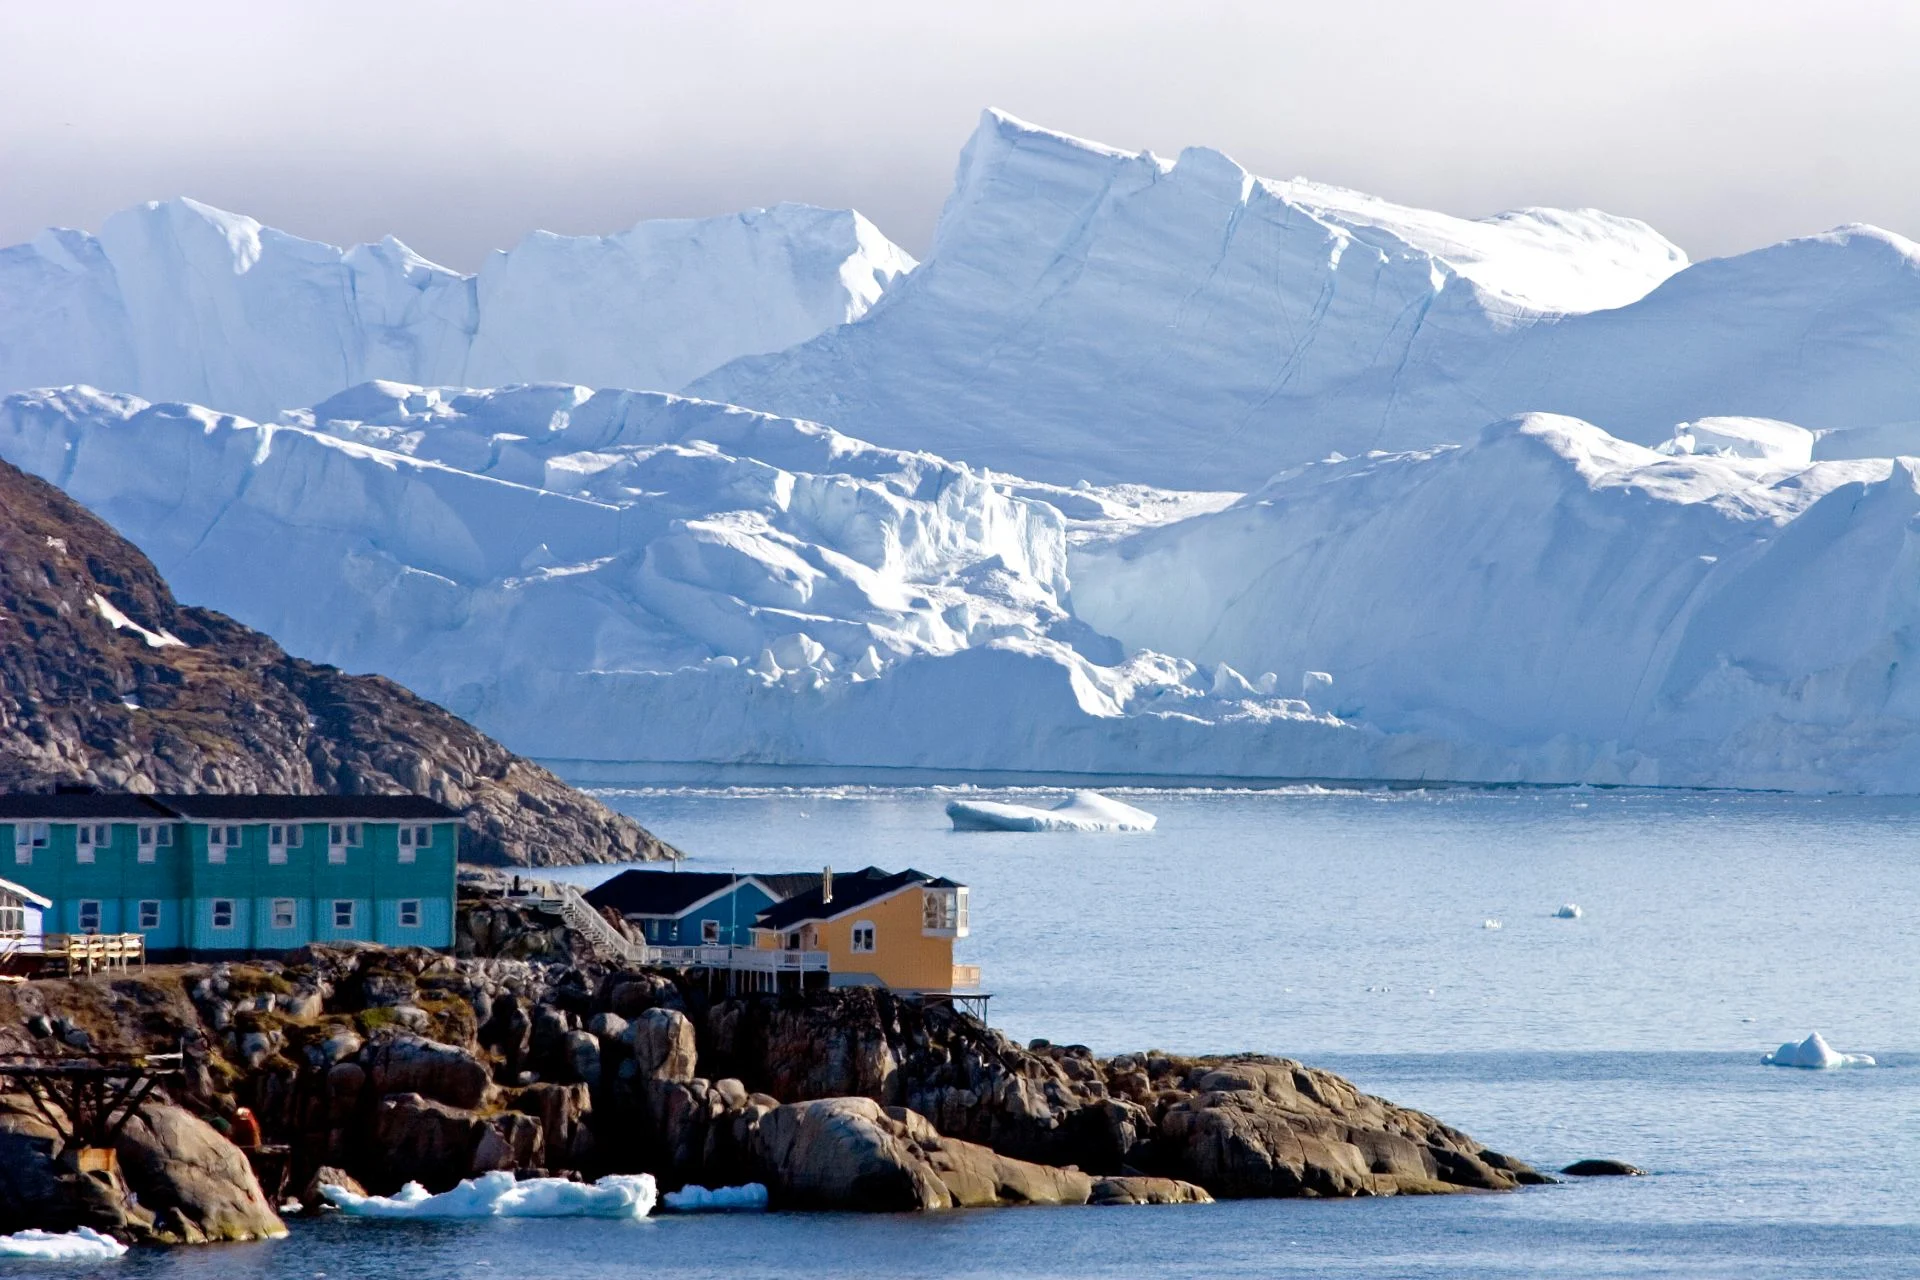 Huge icebergs make for a dramatic backdrop in Ilulissat.